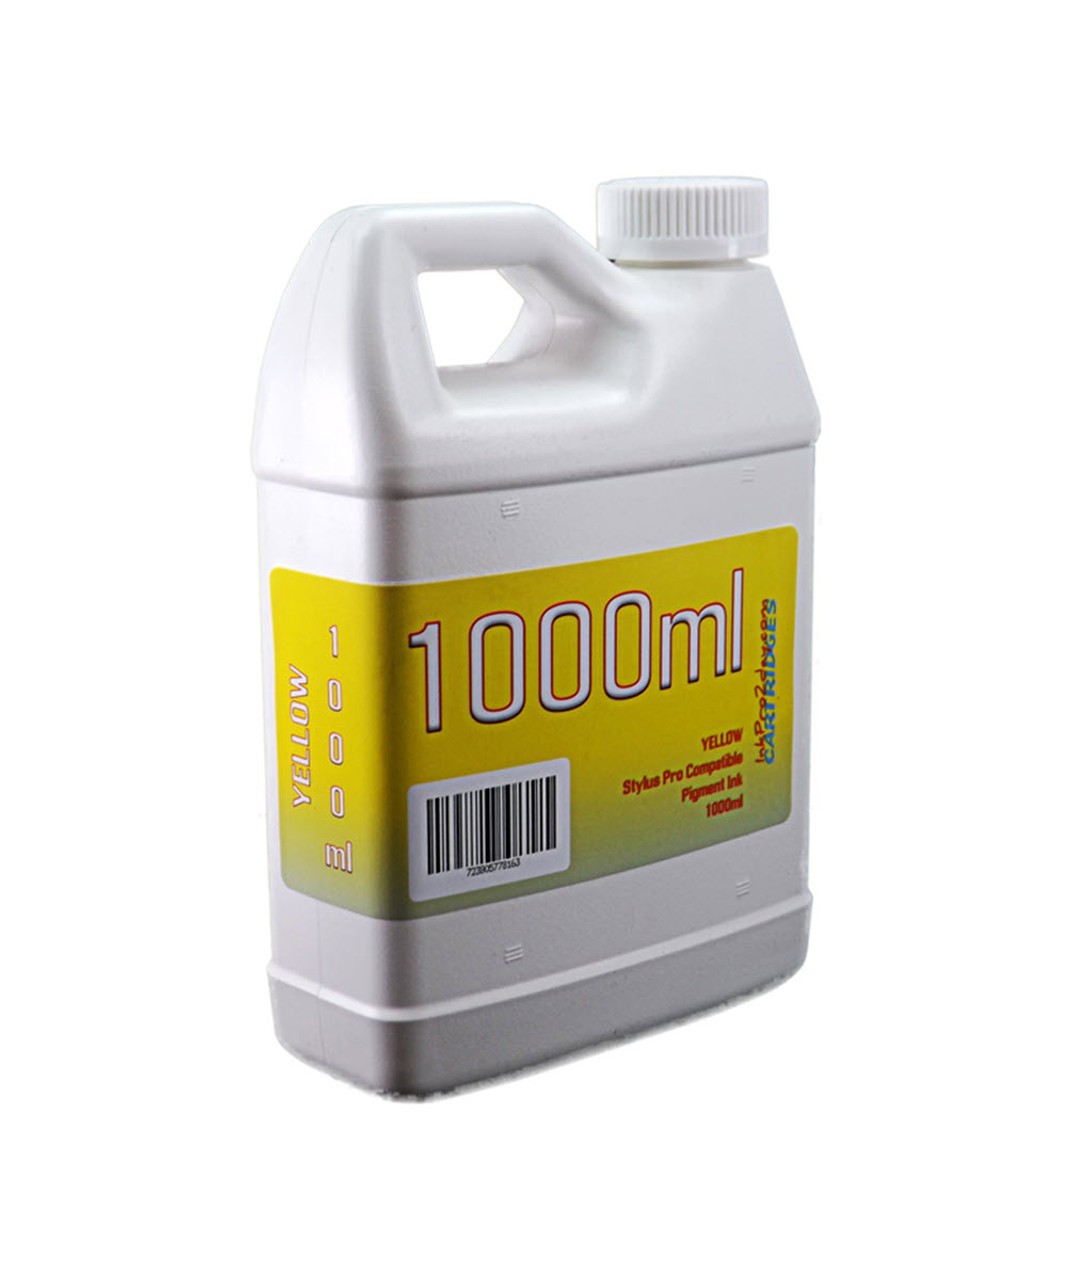 Yellow 1000ml Bottle Compatible UltraChrome HDR Pigment Ink for Epson Stylus Pro 7890 9890 Printers